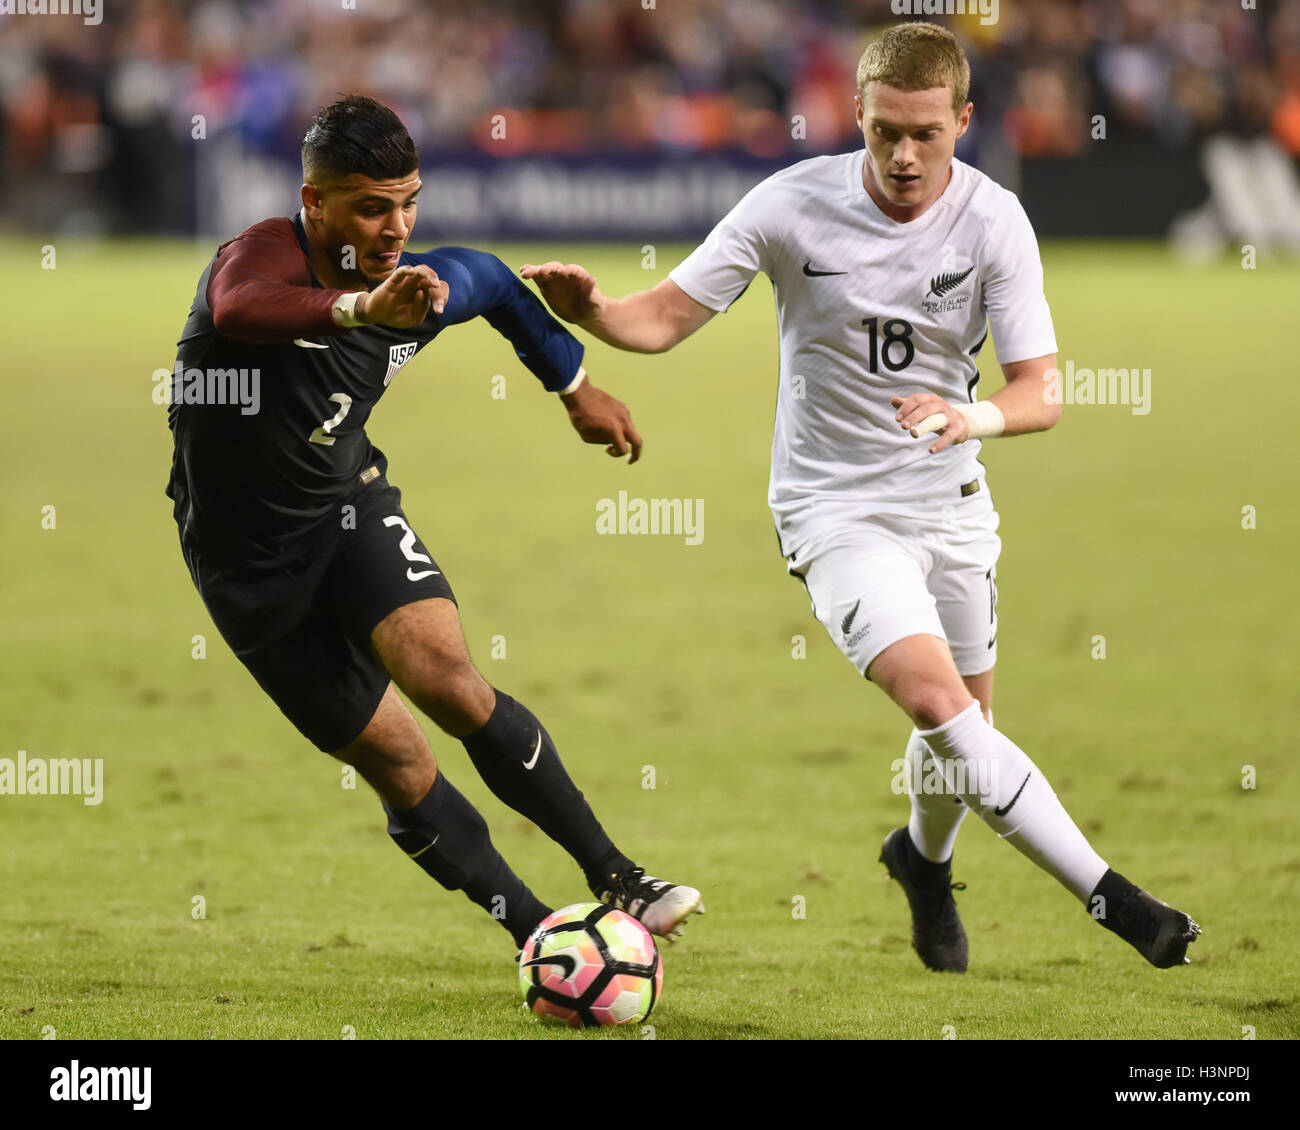 Washington, D.C, USA. 11th Oct, 2016. DEANDRE YEDLIN of the USA takes on a defender during an international friendly between the United States and New Zealand at RFK Stadium in Washington, DC. Credit:  Kyle Gustafson/ZUMA Wire/Alamy Live News Stock Photo